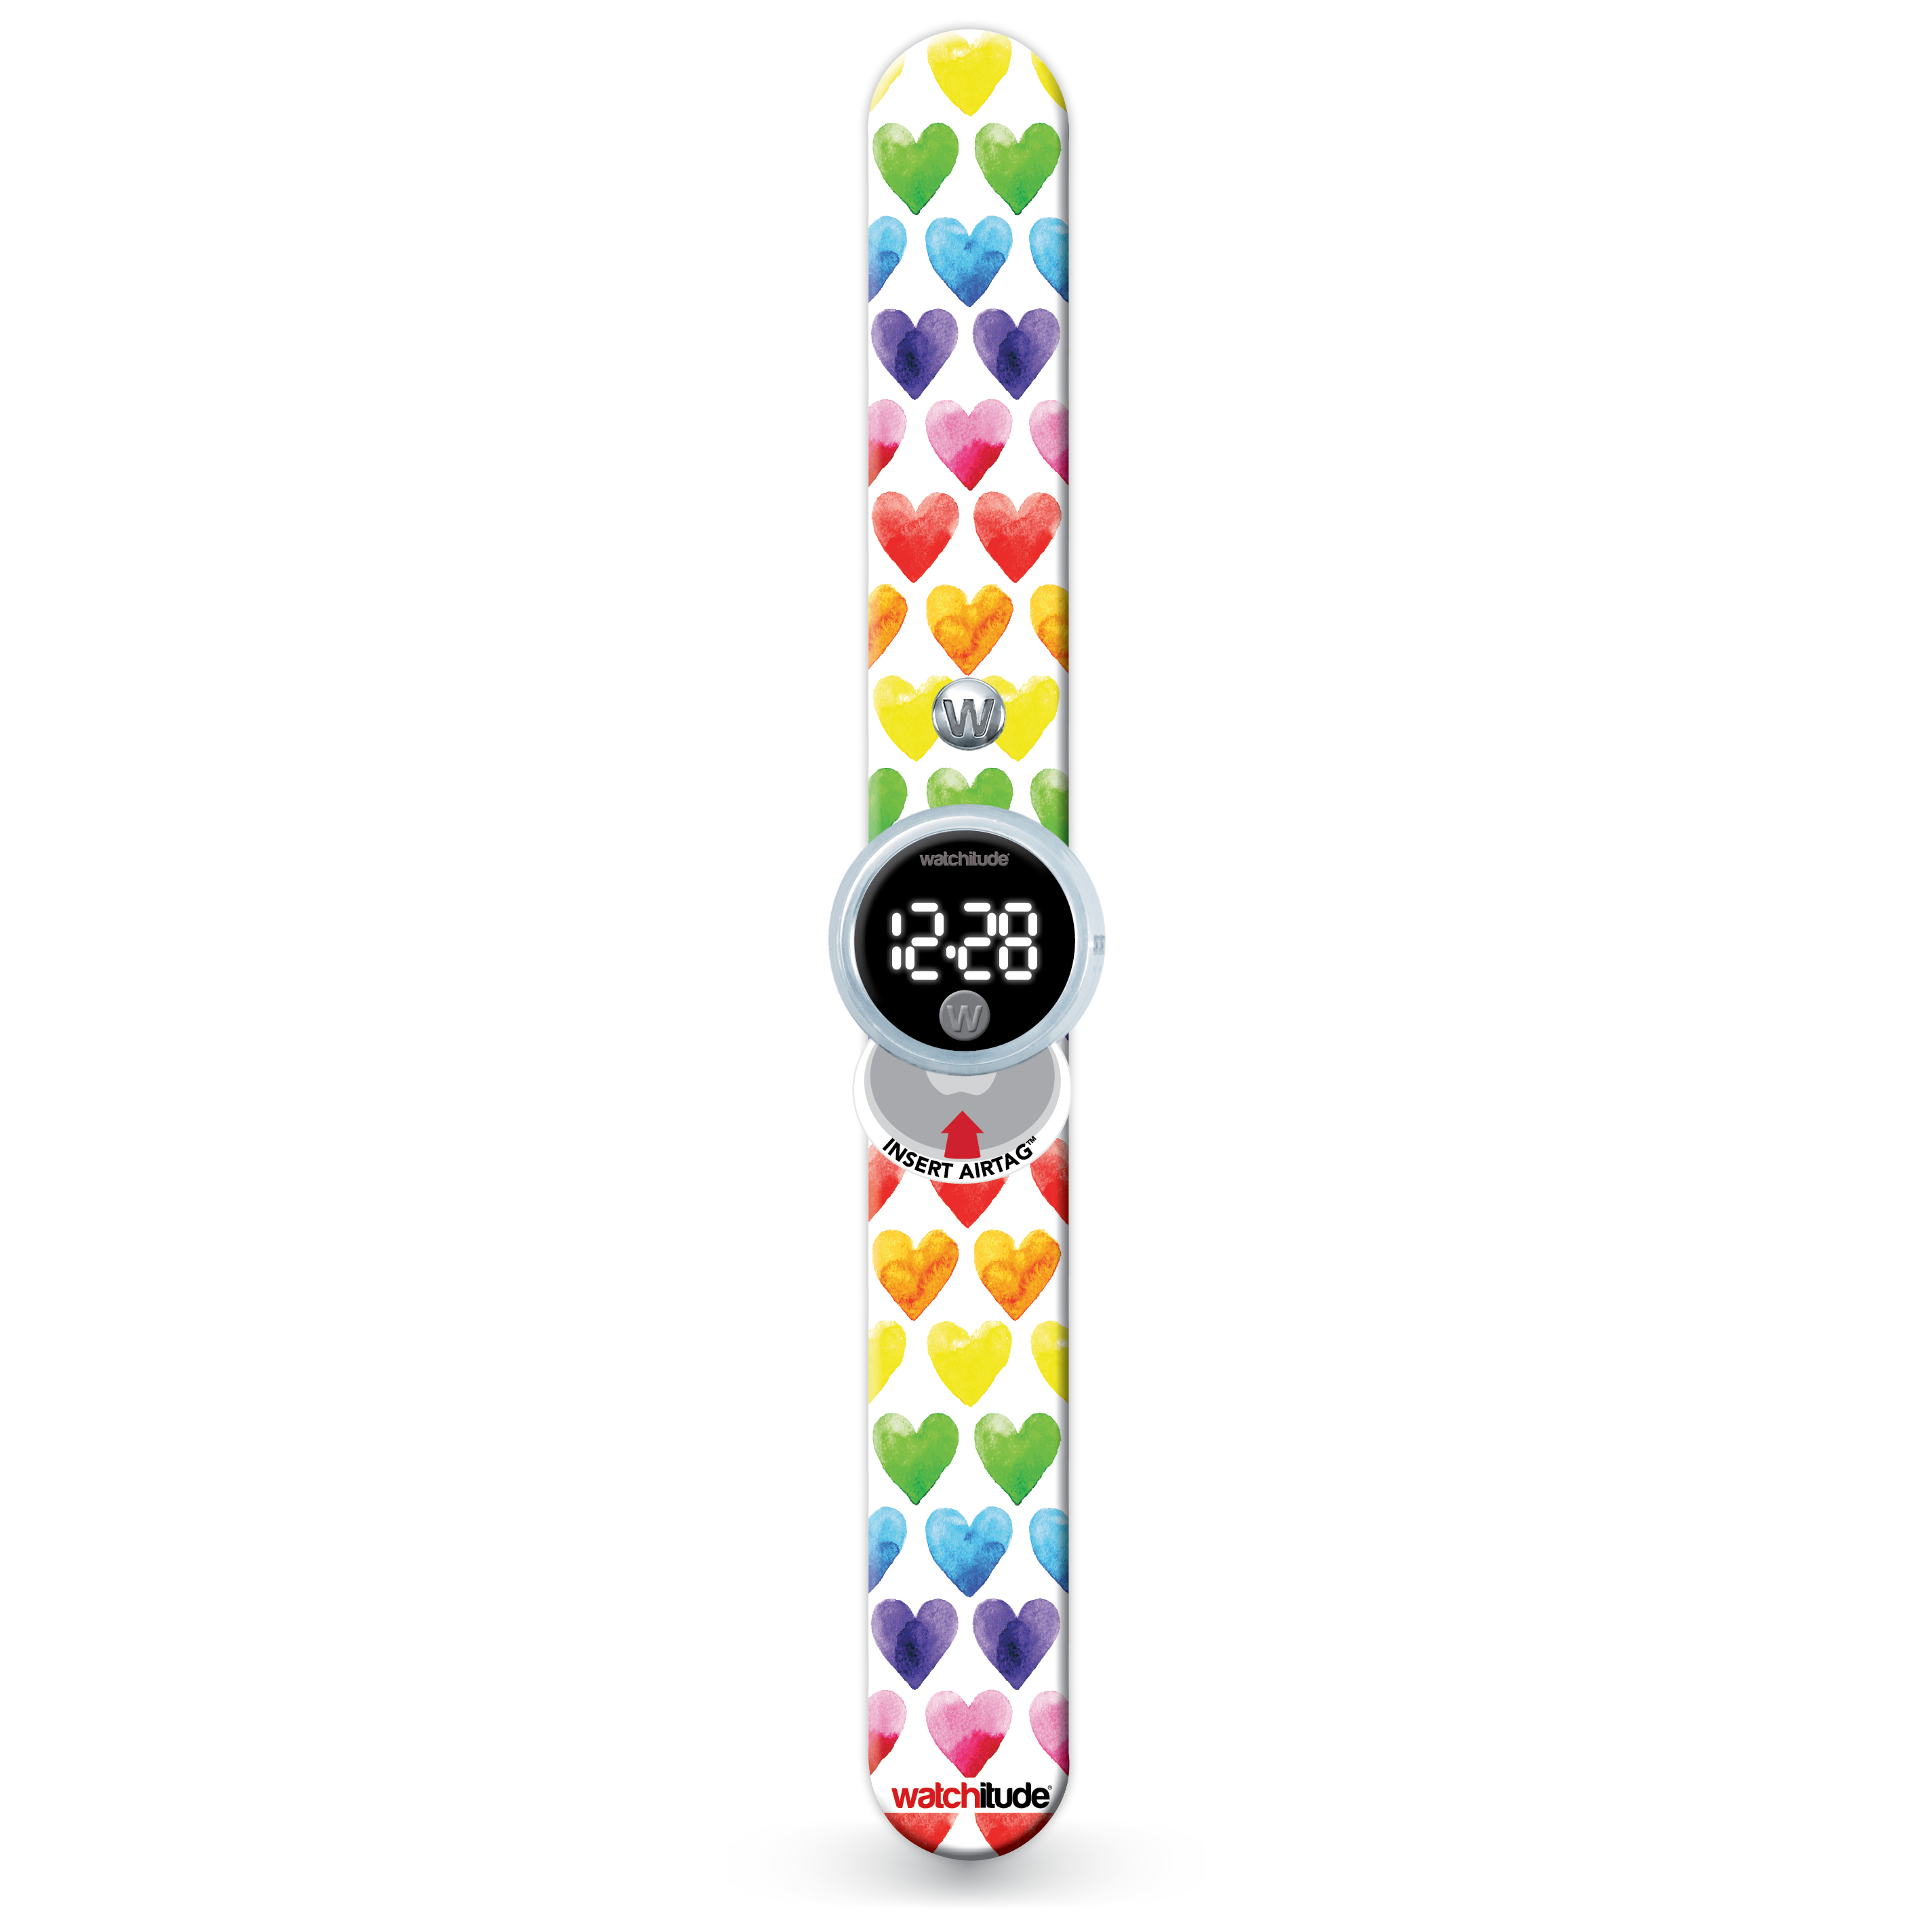 Tag’d Trackable Watch - Watercolor Hearts